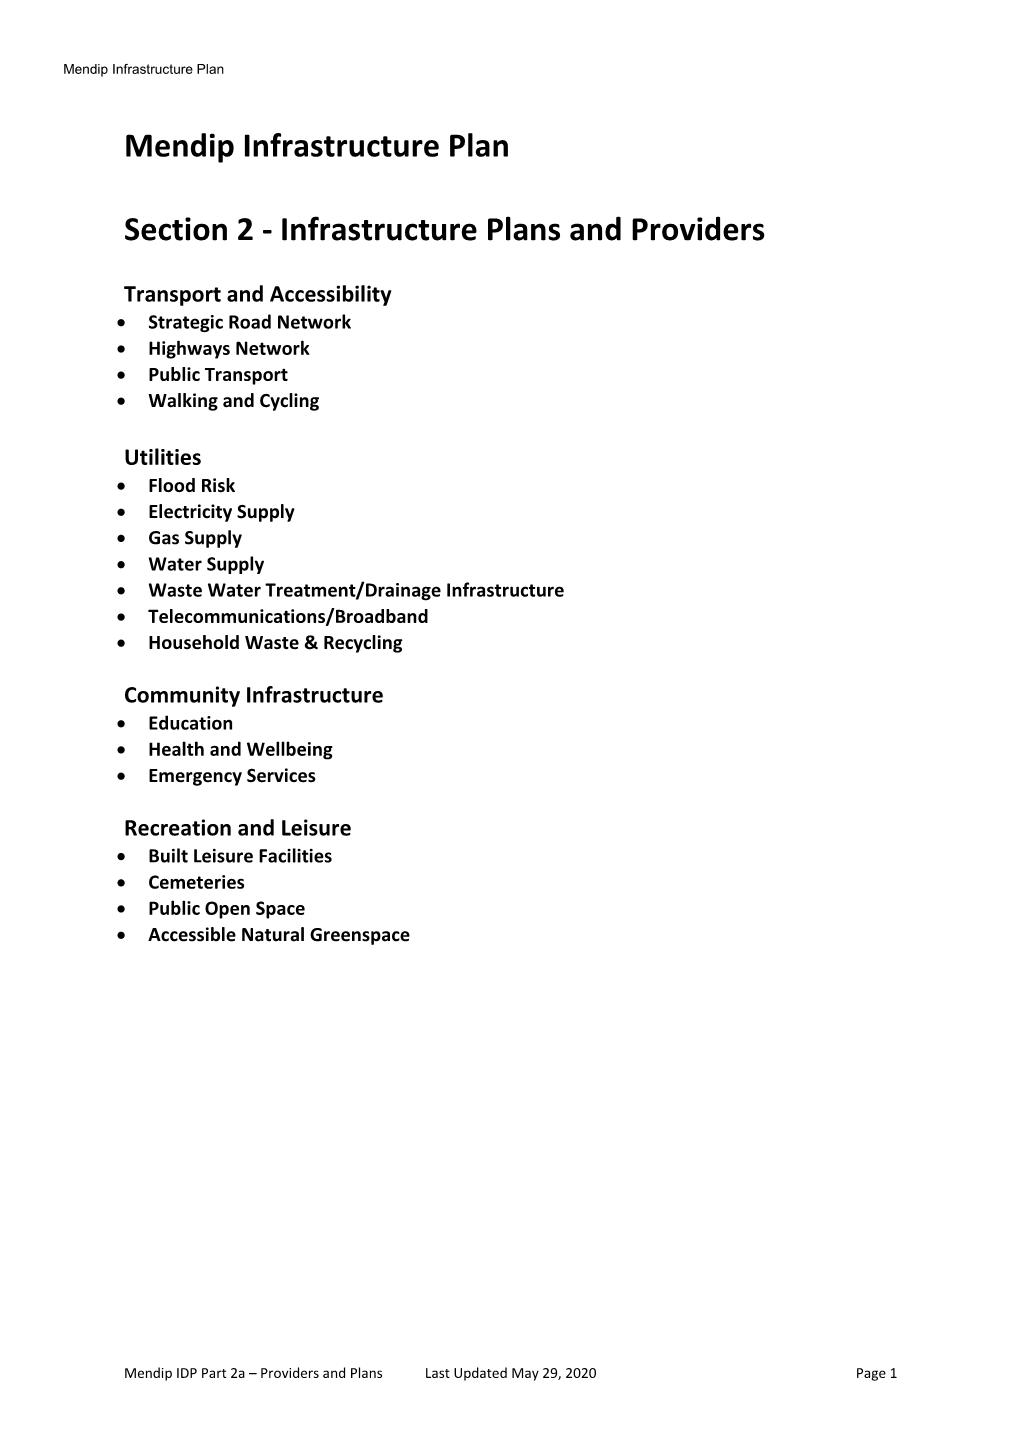 Part 2A Summary of Relevant Infrastructure Plans and Providers